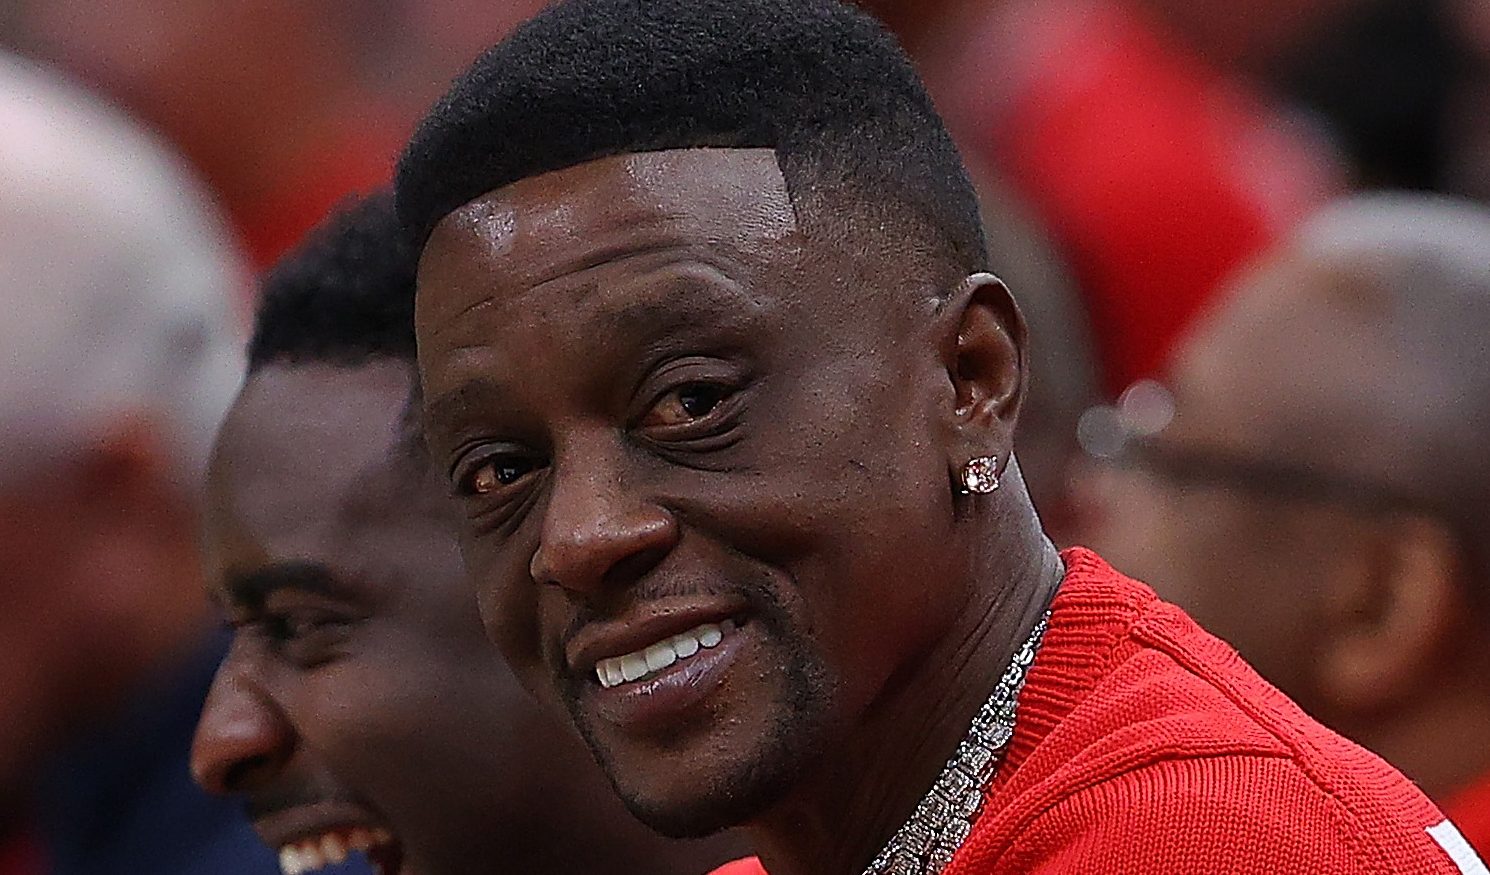 Boosie Badazz Gets Into Minor Car Accident, Lets Driver Slide